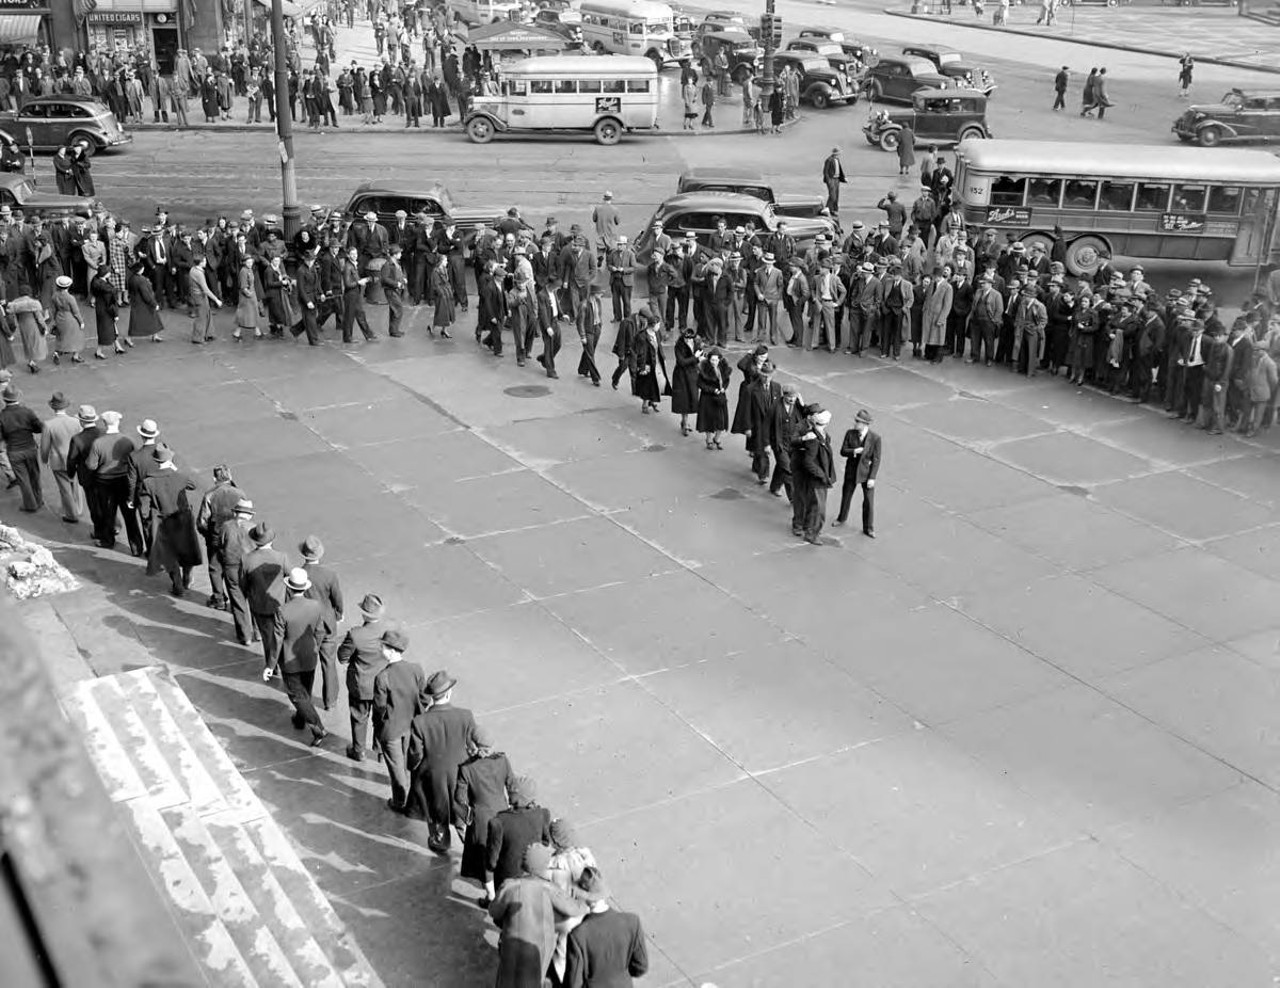 
March 31, 1938: Large group of people picket for UAW march in Detroit near City Hall.